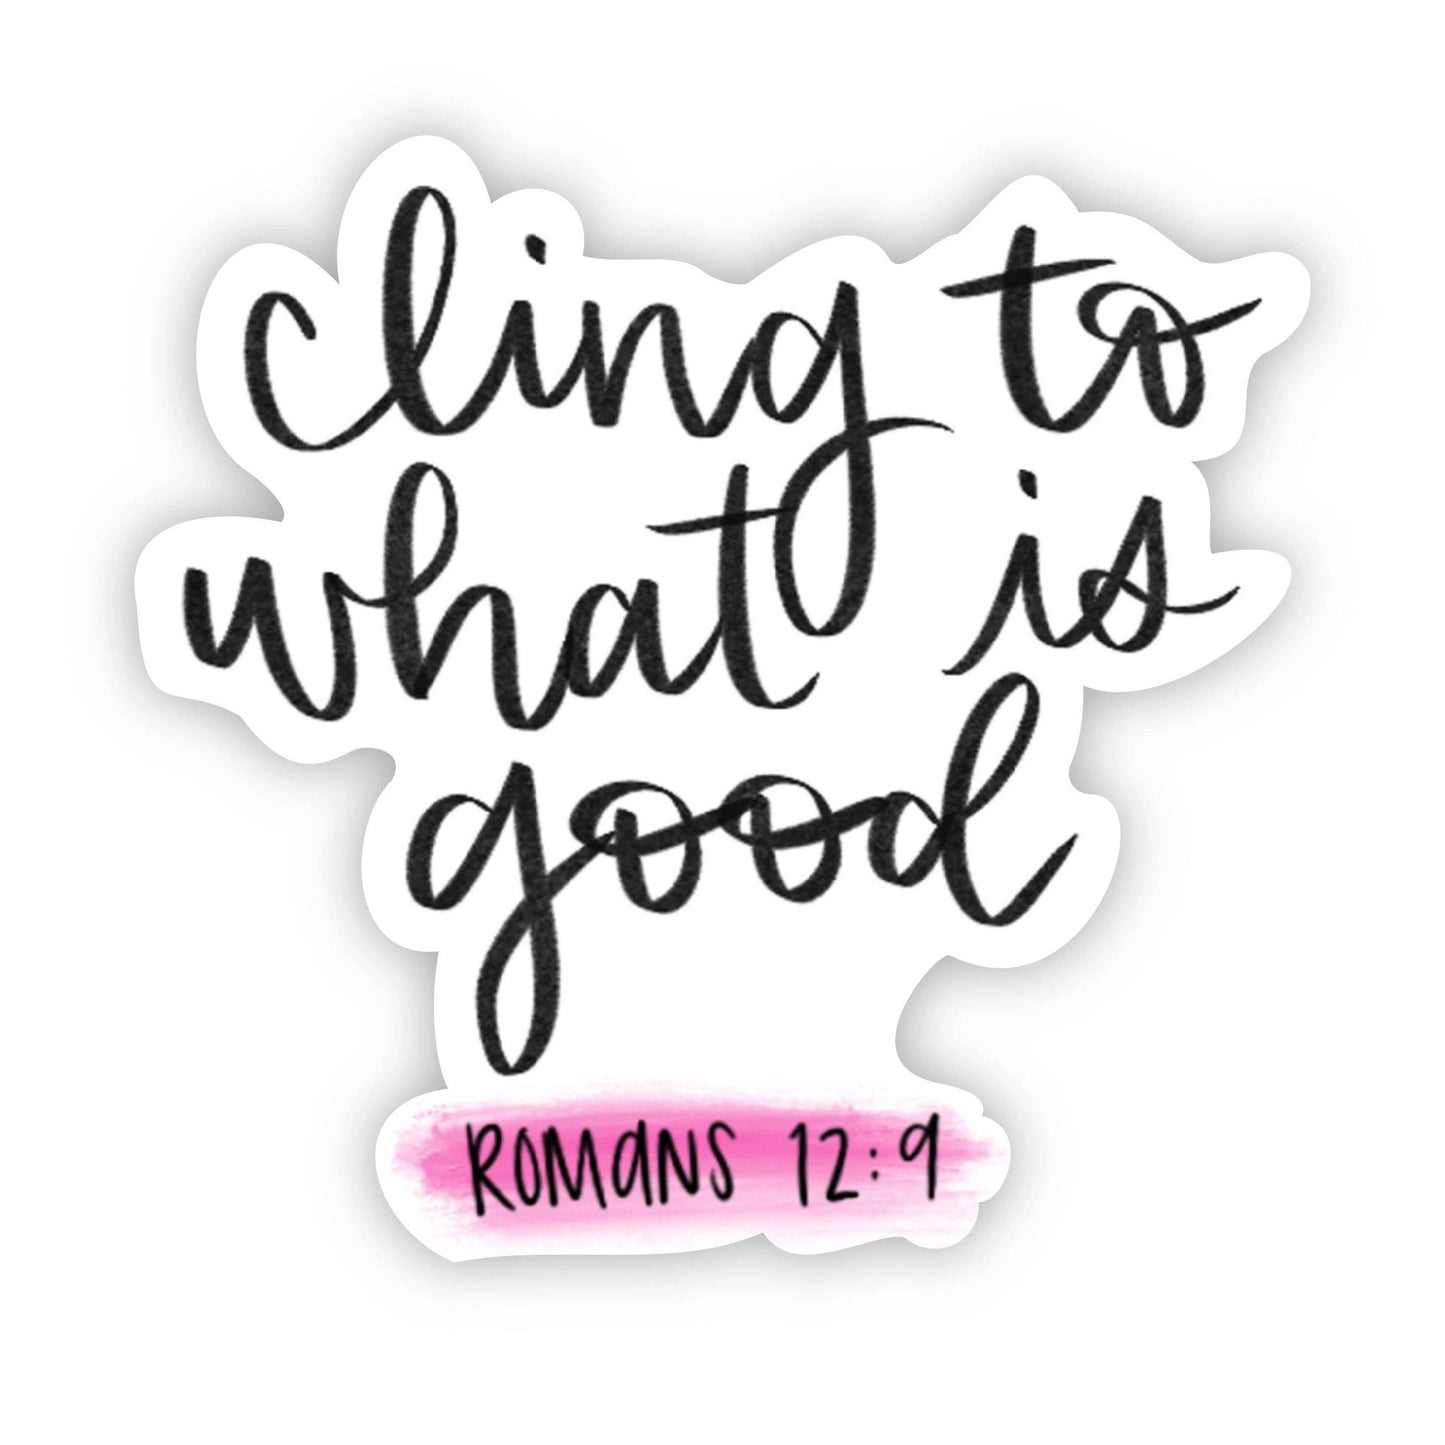 Cling to What is Good - Romans 12 vs 9